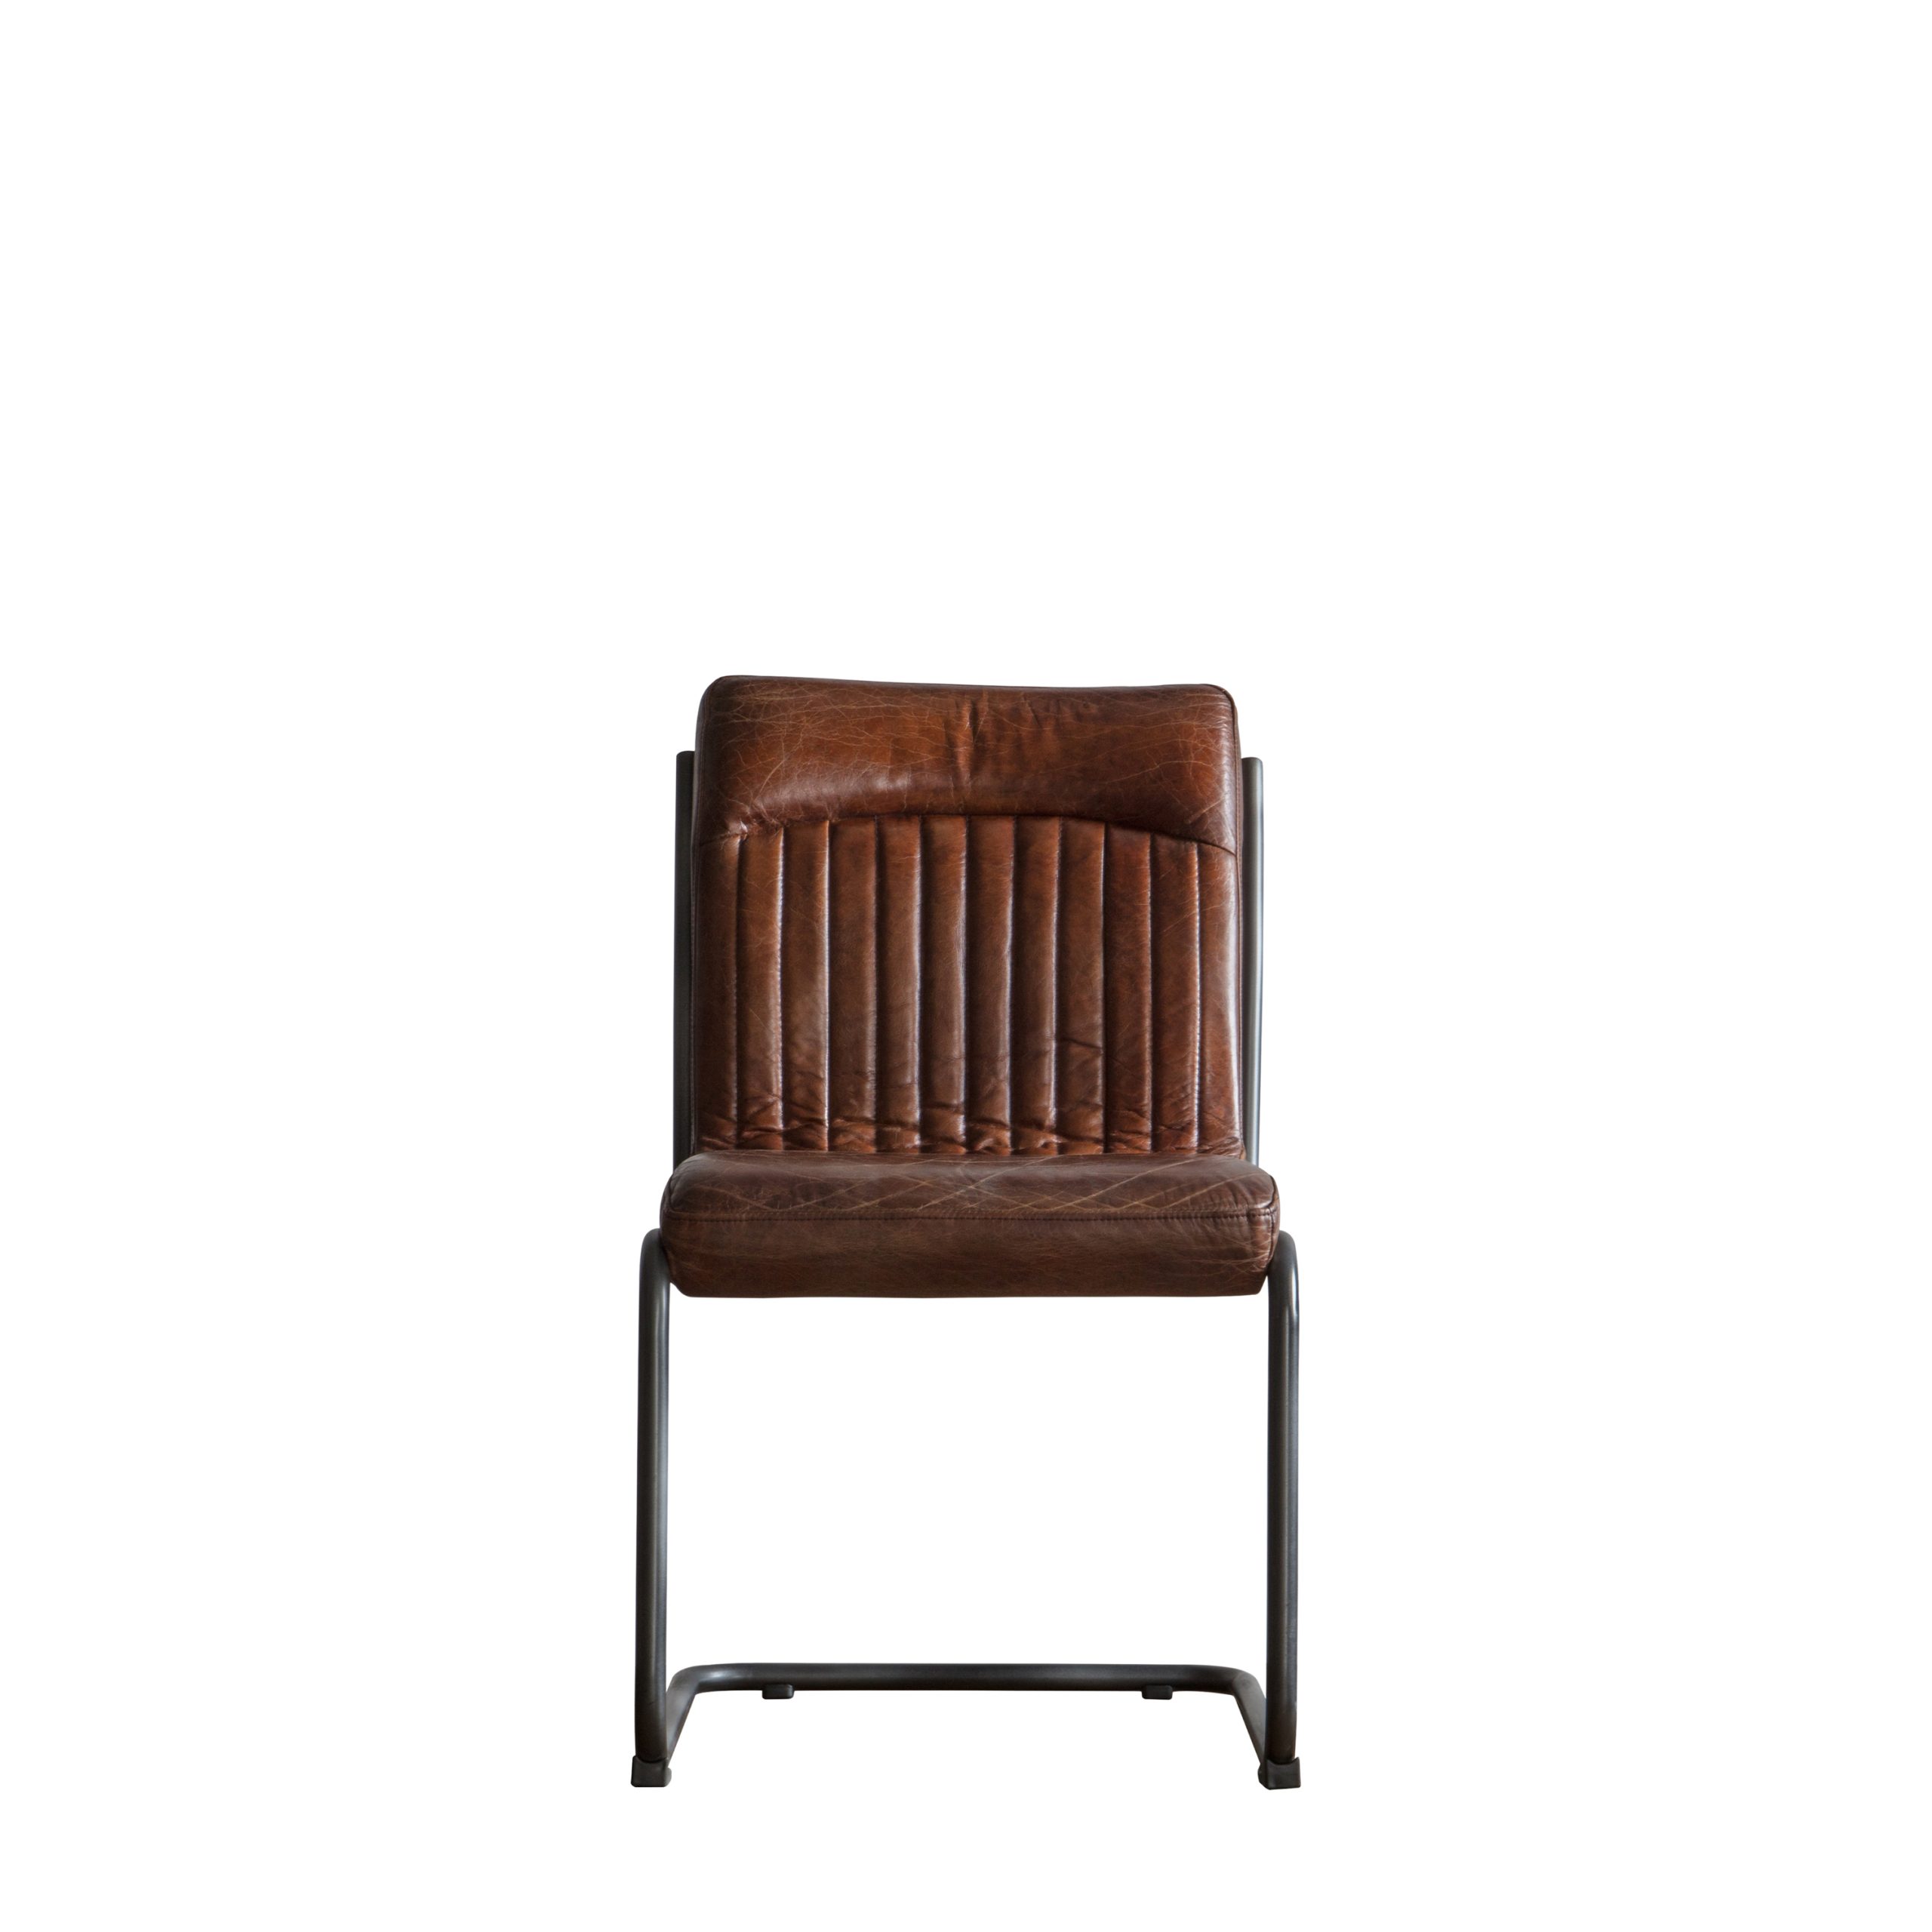 Gallery Direct Capri Leather Chair Brown